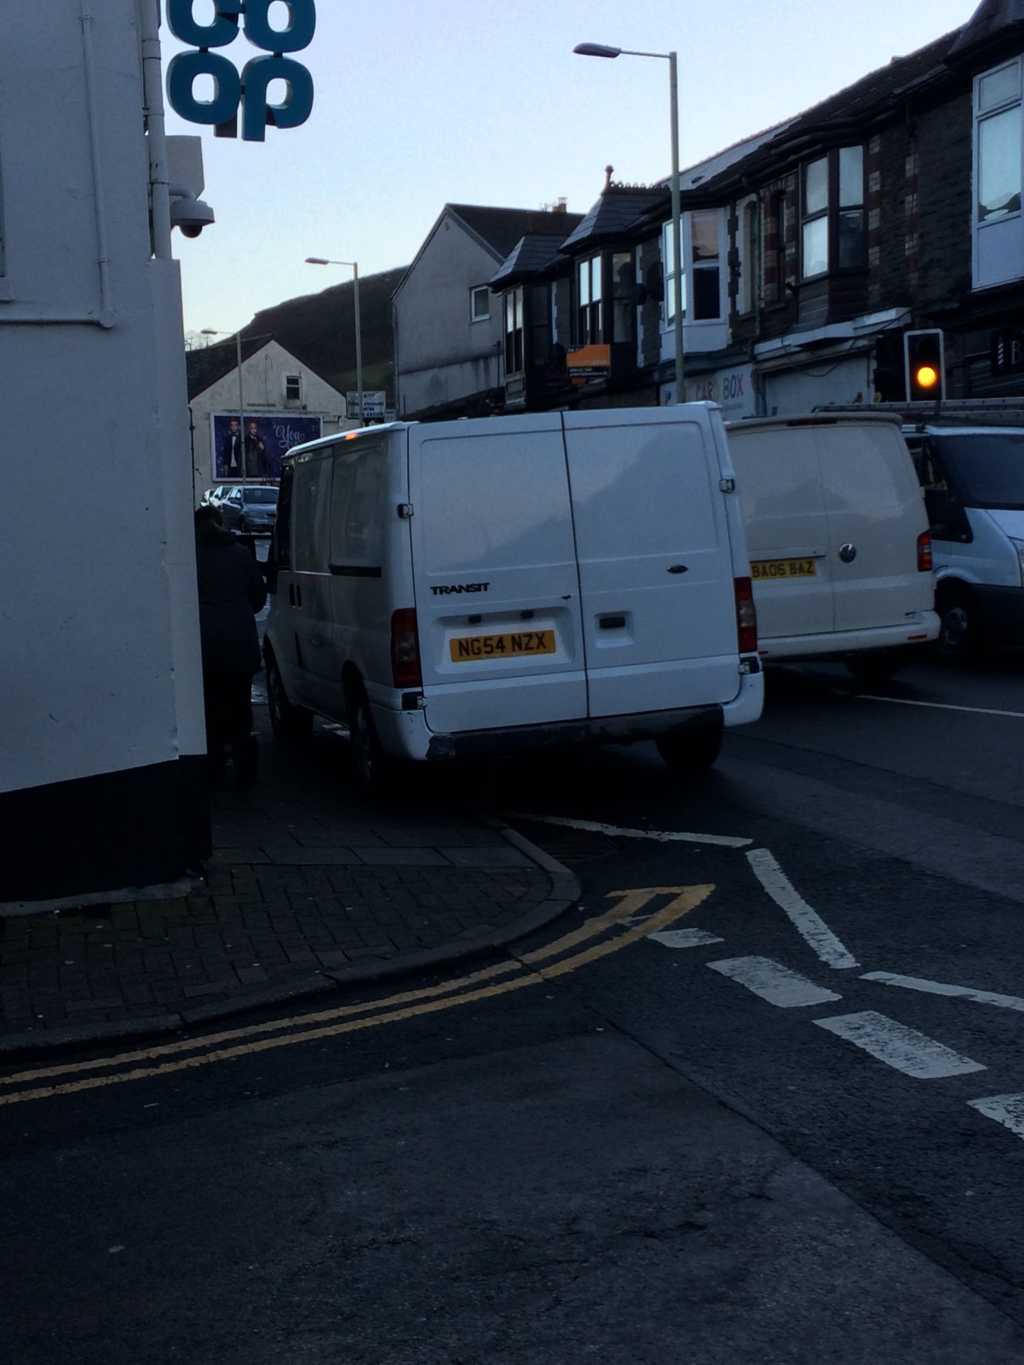 NG54 NZX is a Selfish Parker